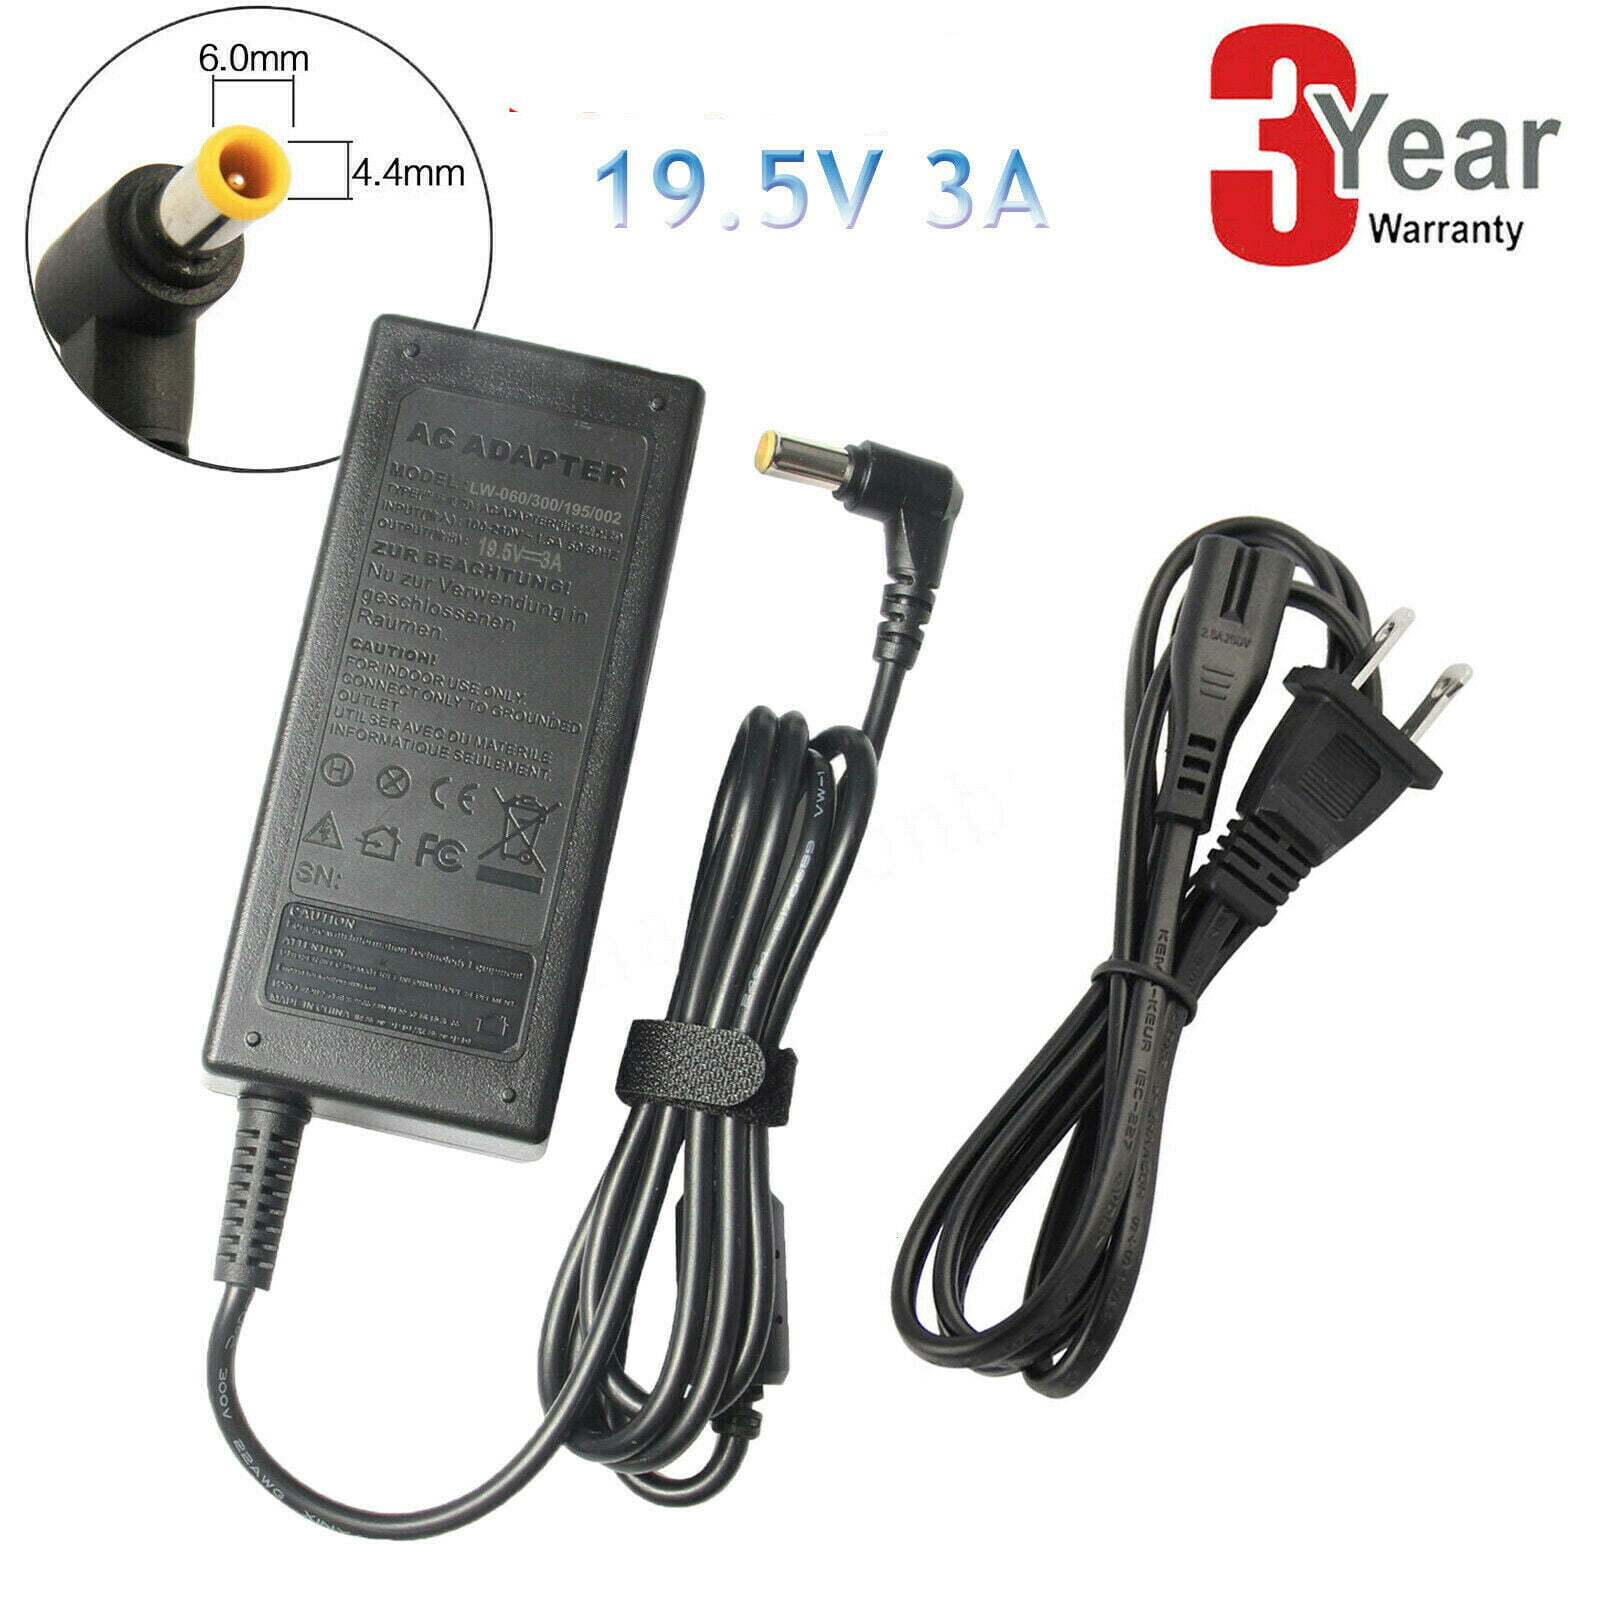 W2361VG D2342P-PN W2246T-PF W2442PA-BF W2246T E2241V-BN W2361V-PF W2361V 6FT AC Power Cord Cable For LG Flattron LCD Monitor TV W2442PA